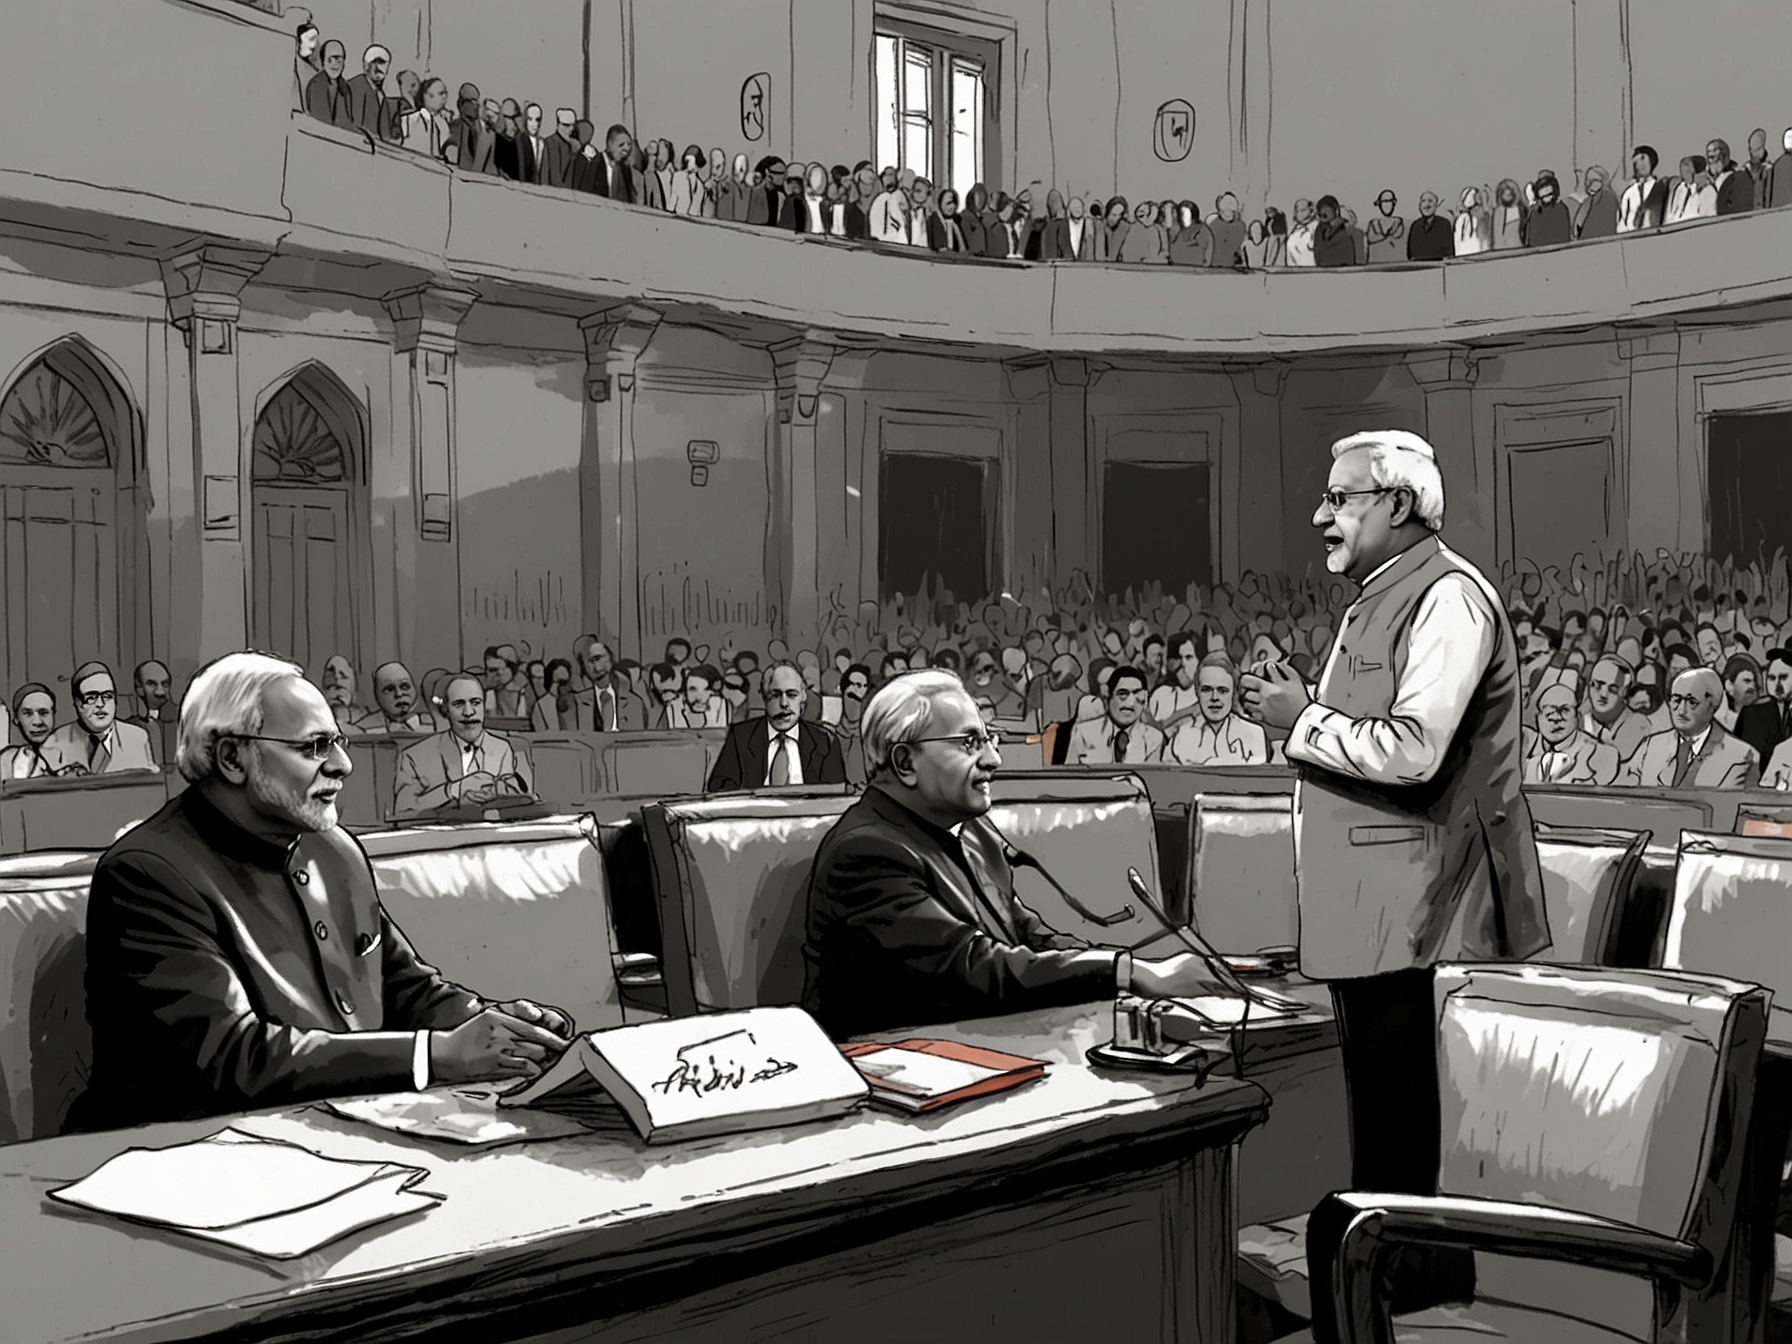 A heated parliamentary session in India, showcasing opposition members in protest and government officials defending their stance, capturing the current confrontational atmosphere.